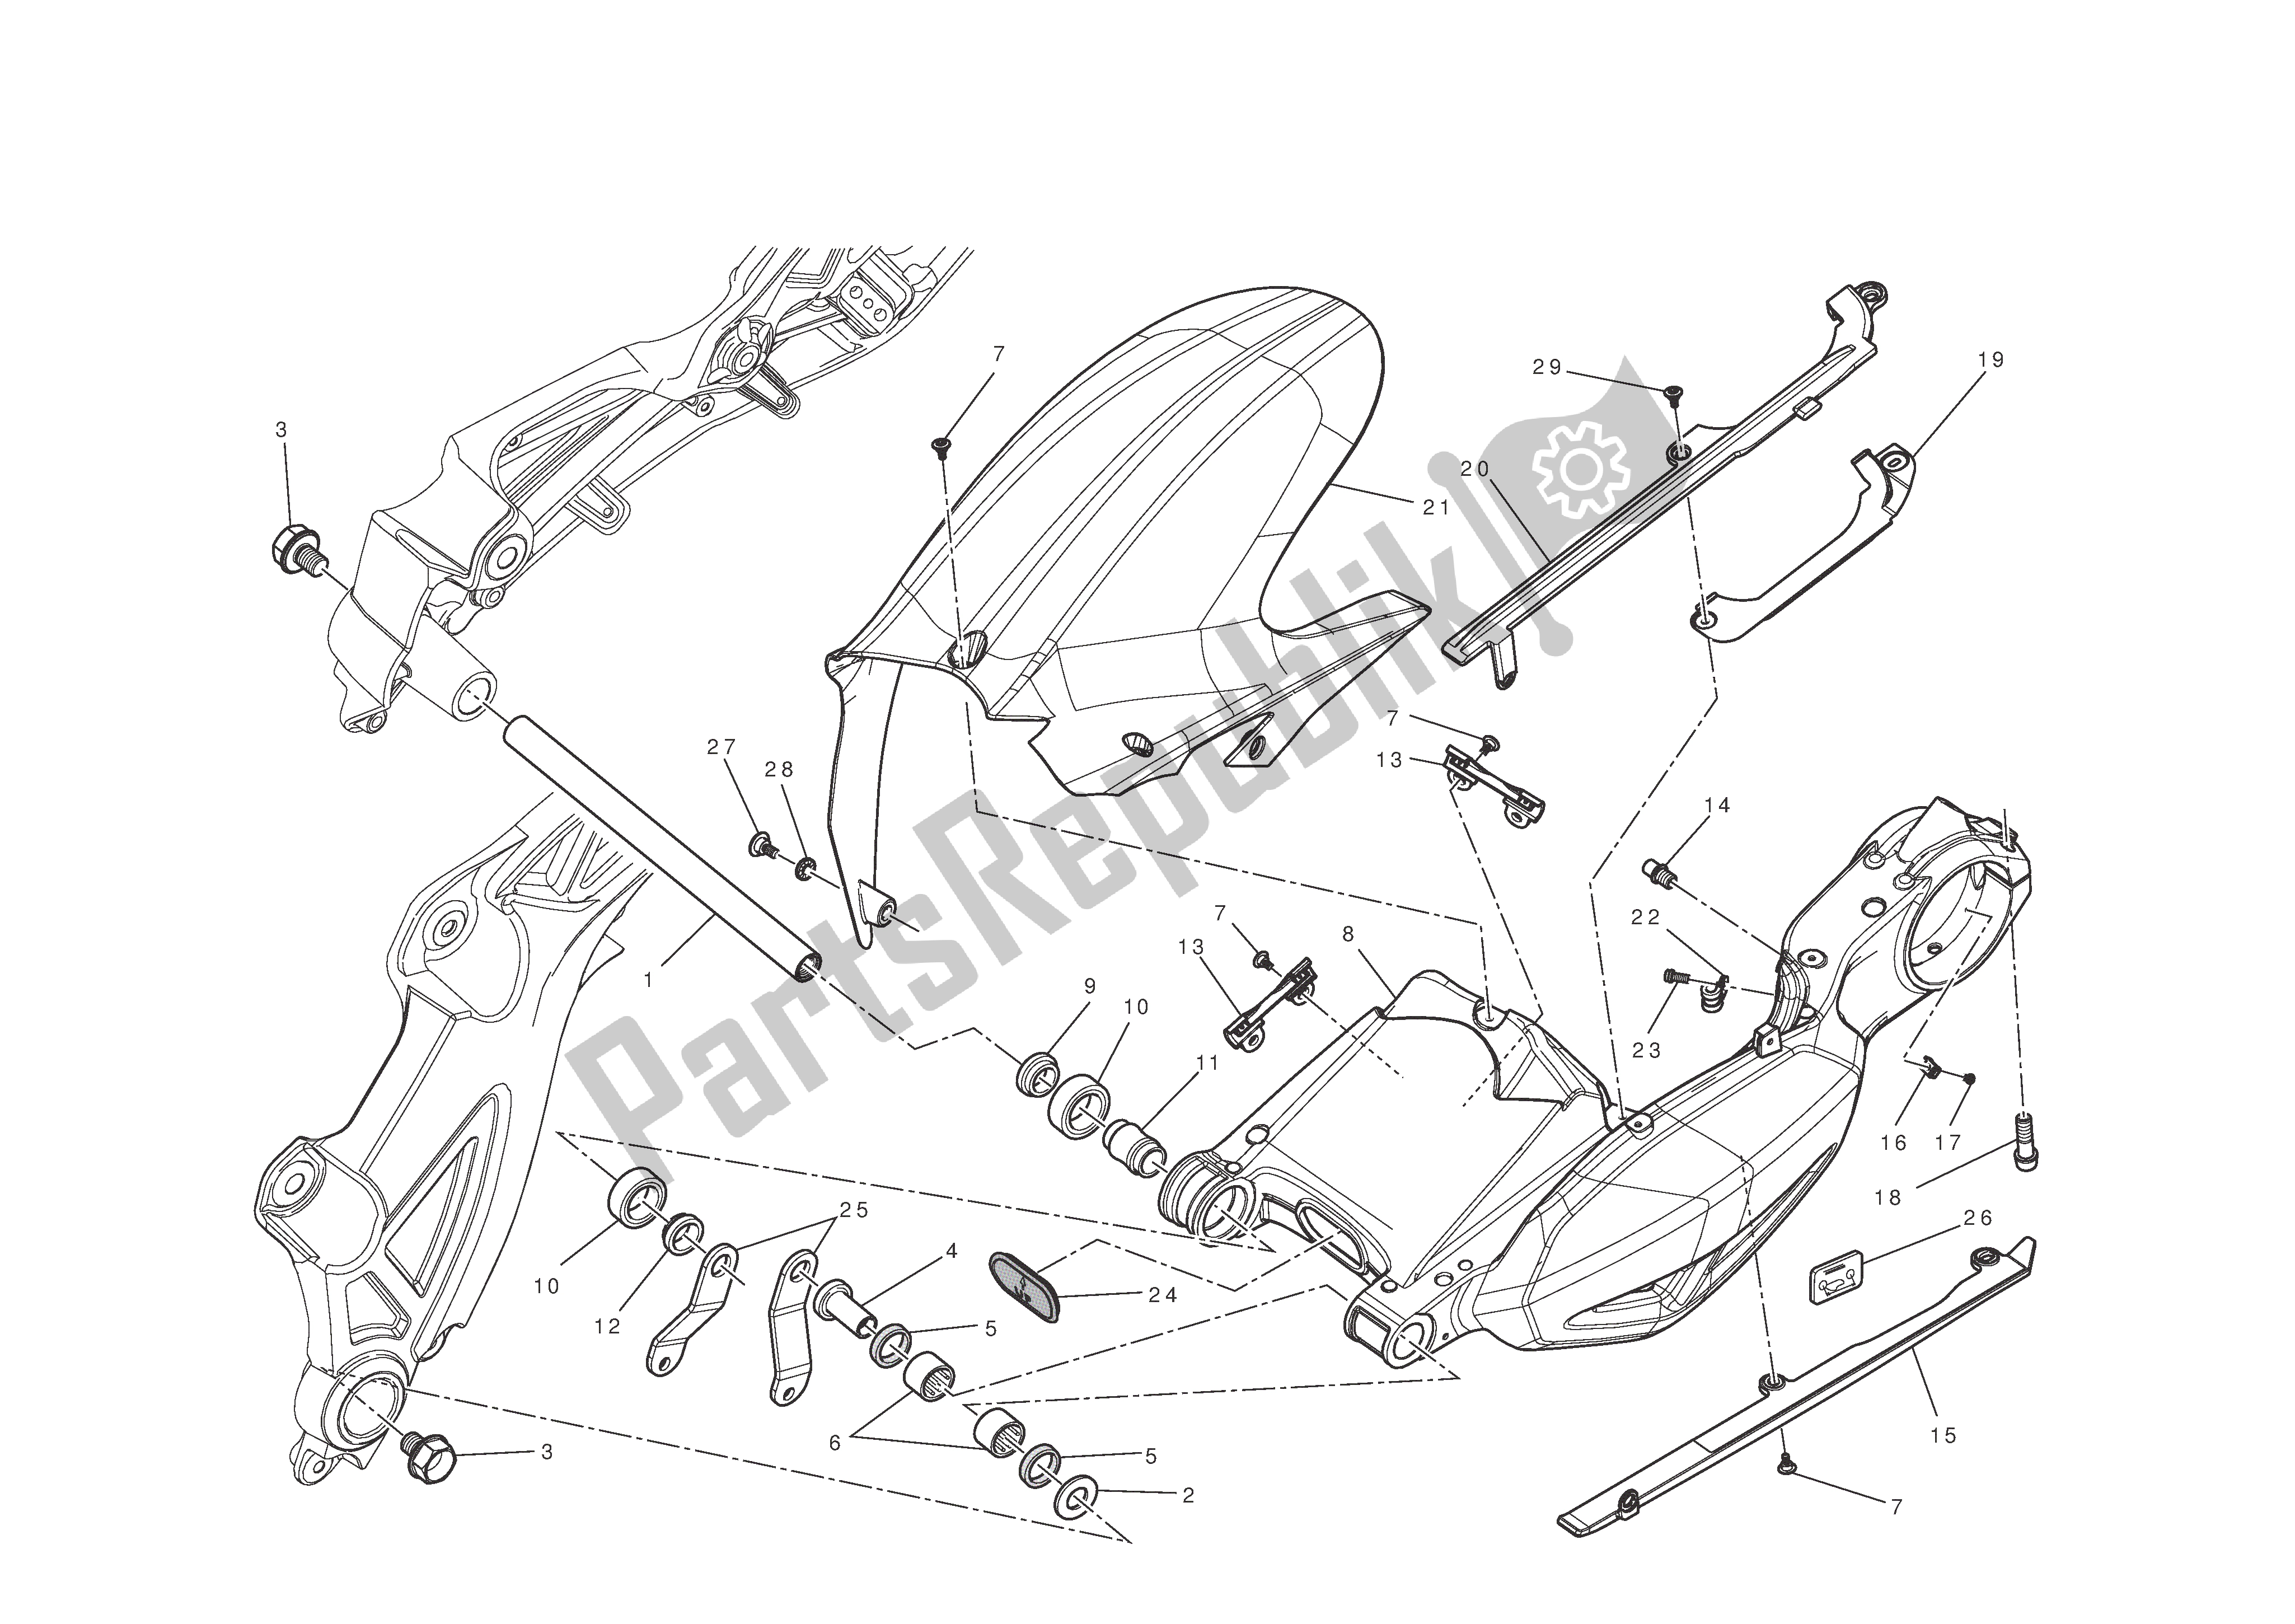 All parts for the Swingarm of the Ducati Diavel AMG 1200 2013